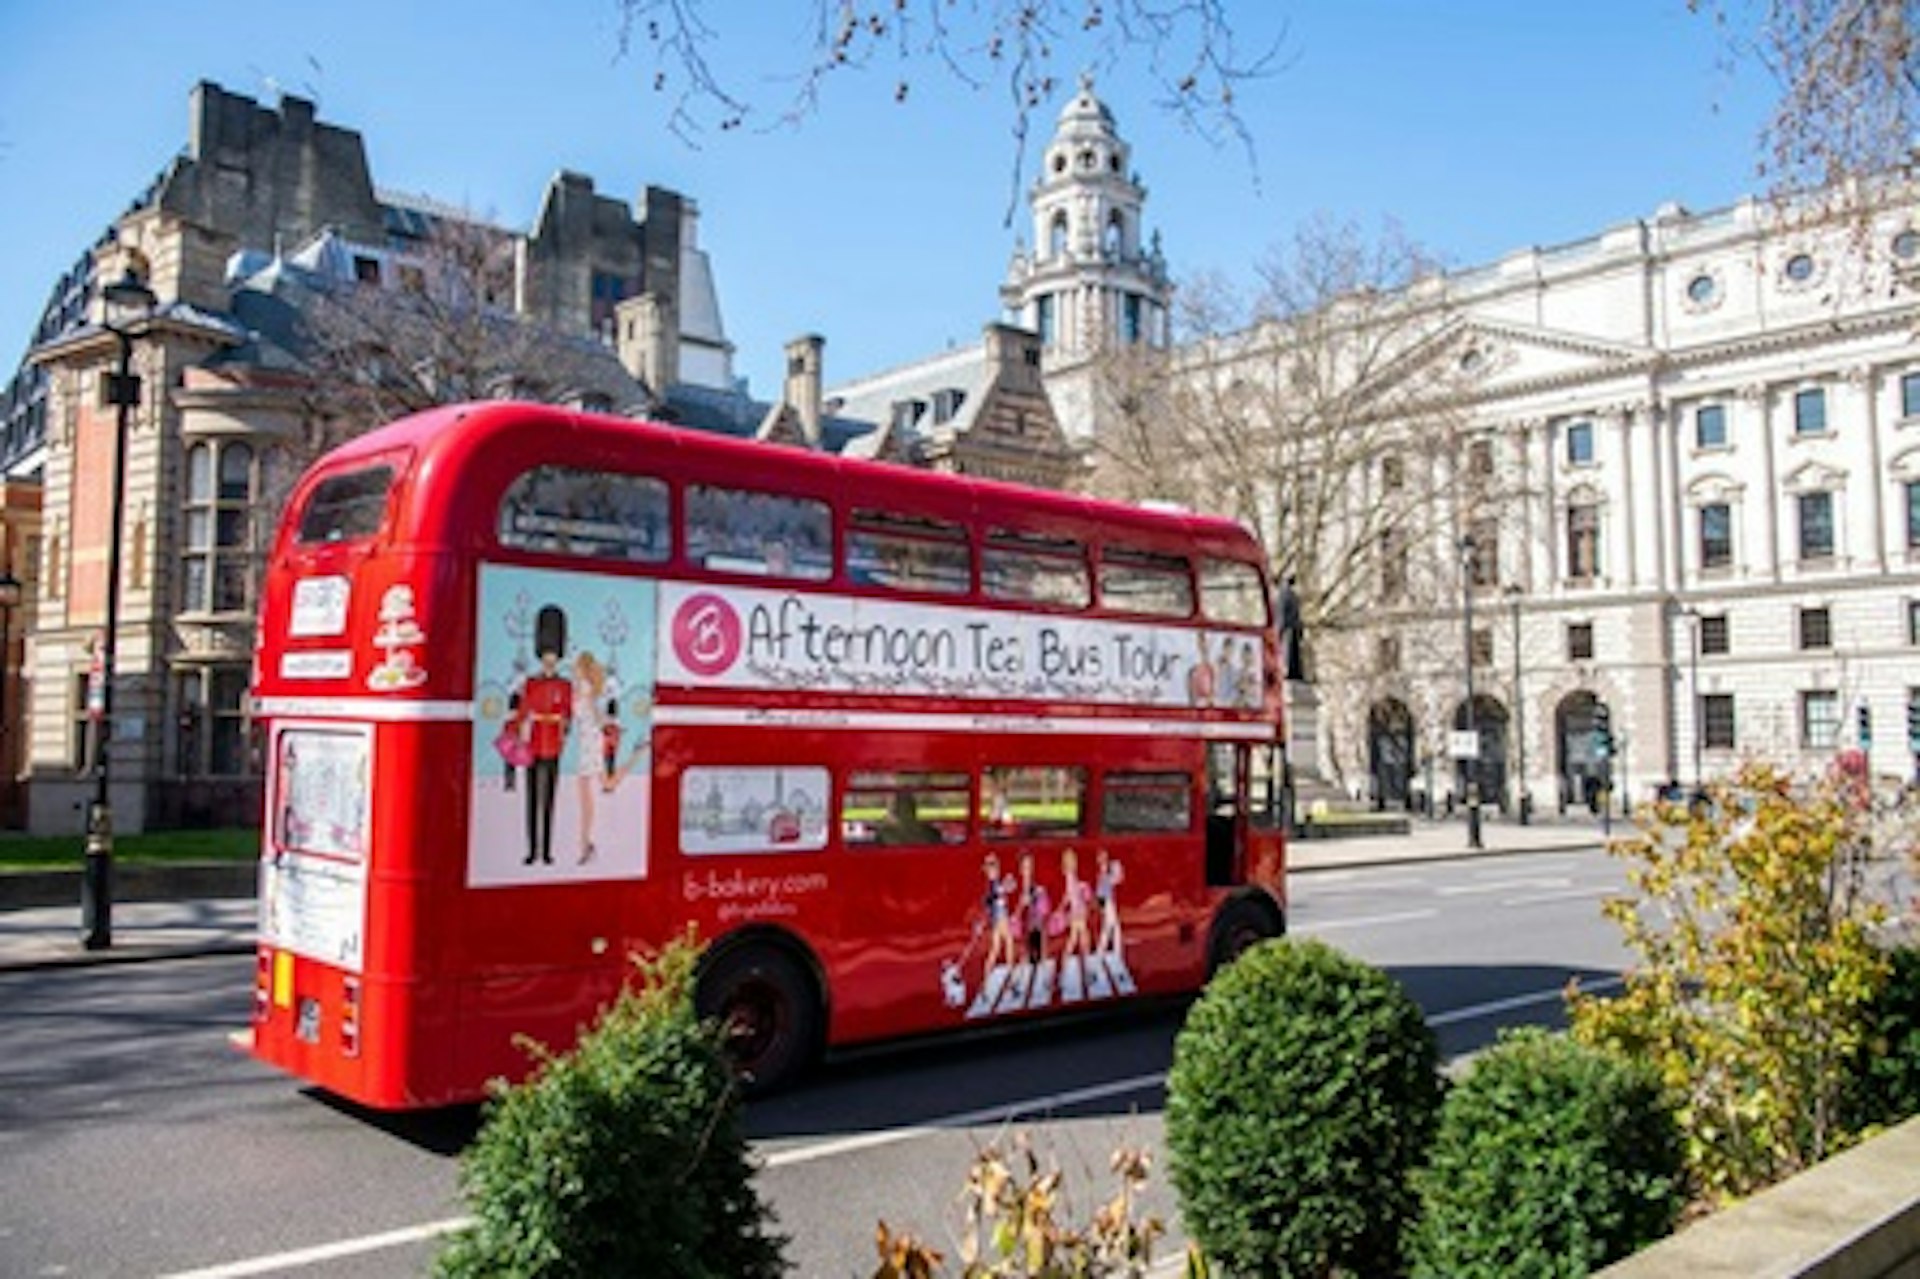 Vintage Afternoon Tea Bus in London for Two with B Bakery 3